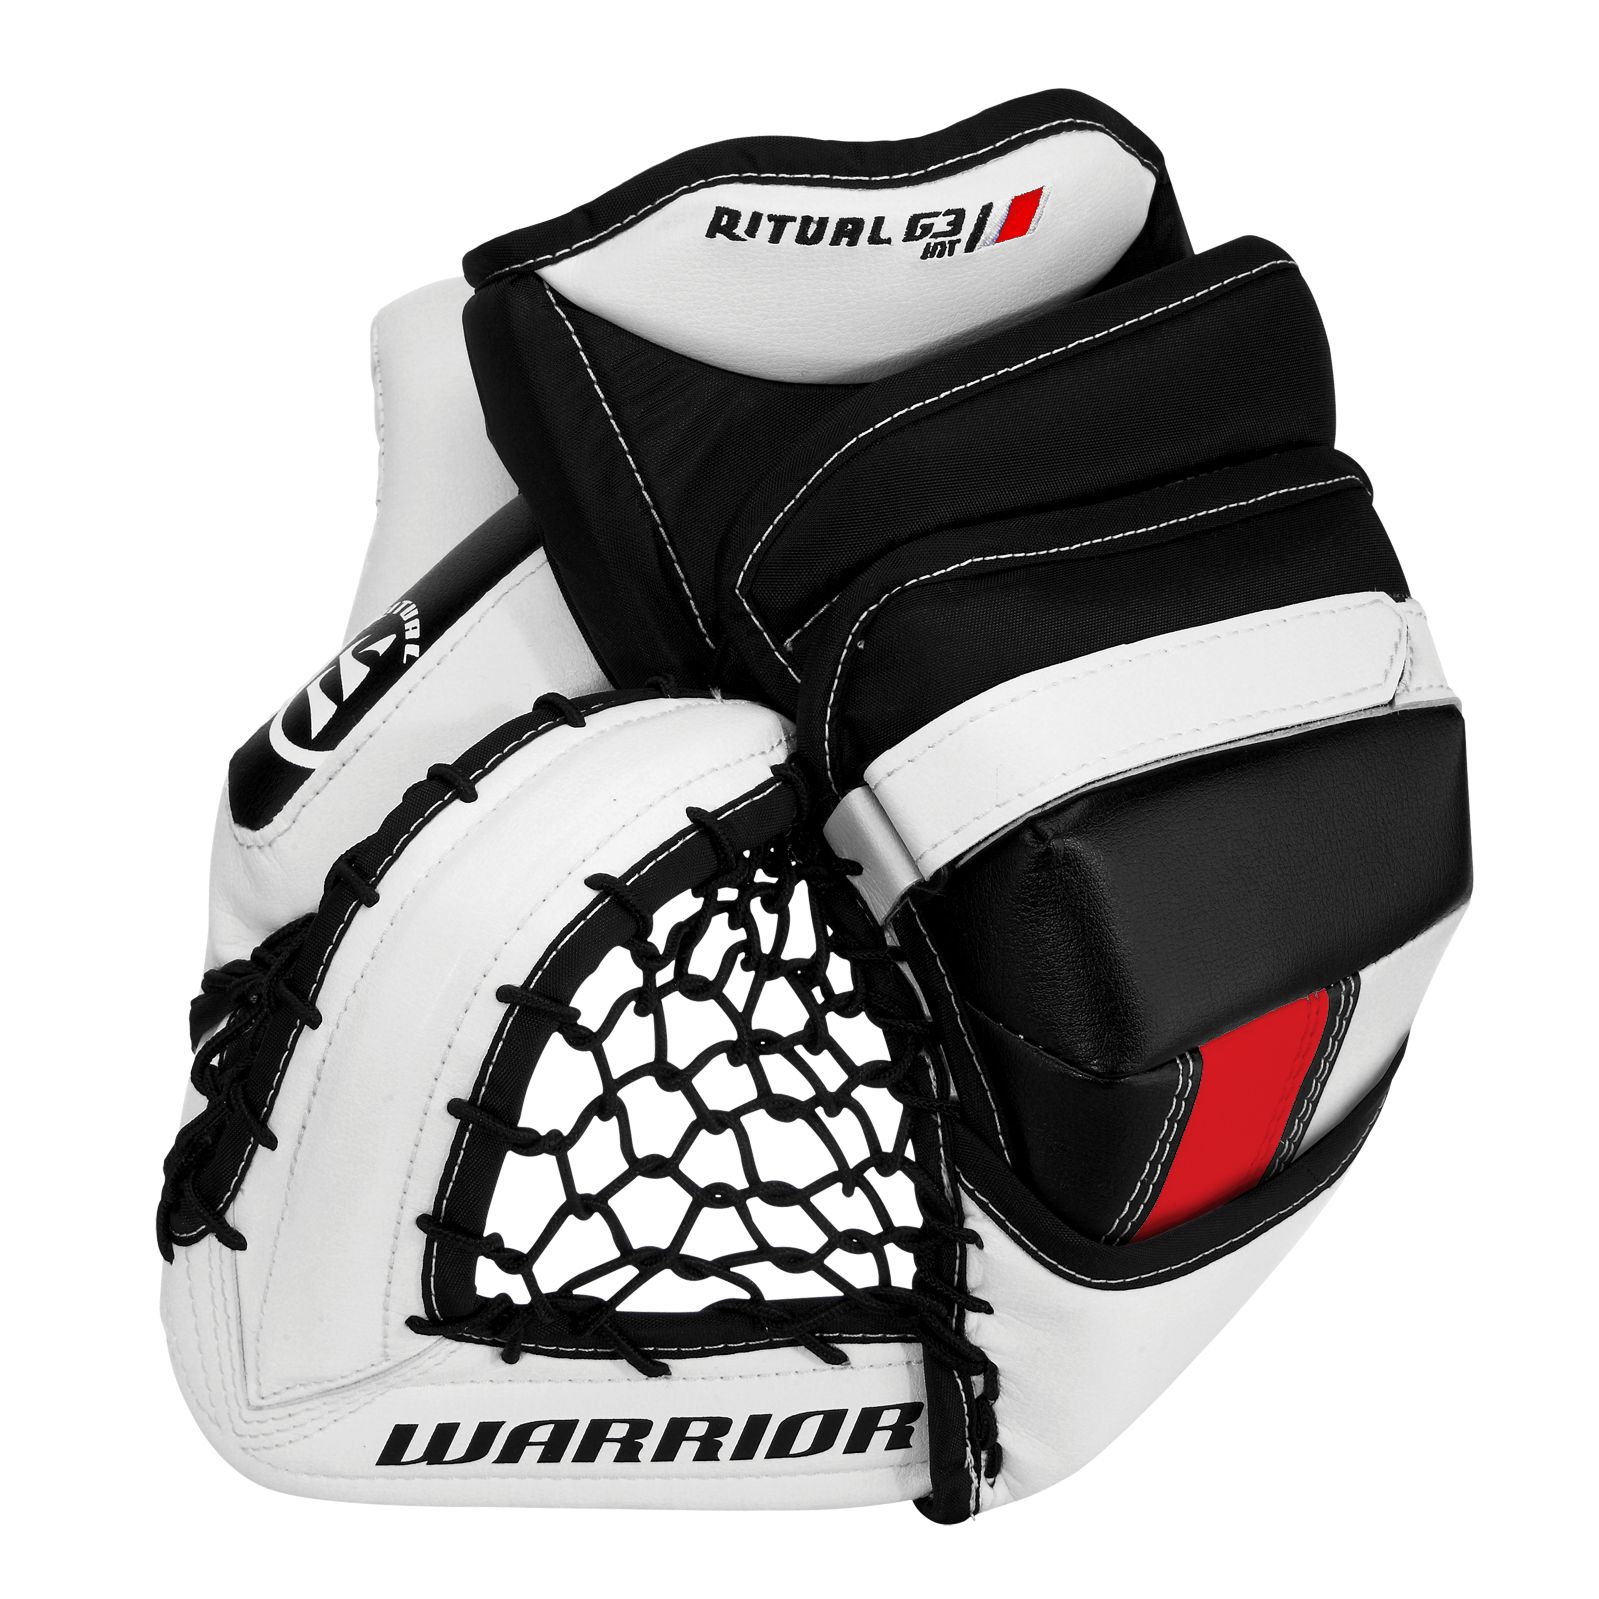 Ritual G3 Int. Trapper, White with Black & Red image number 1